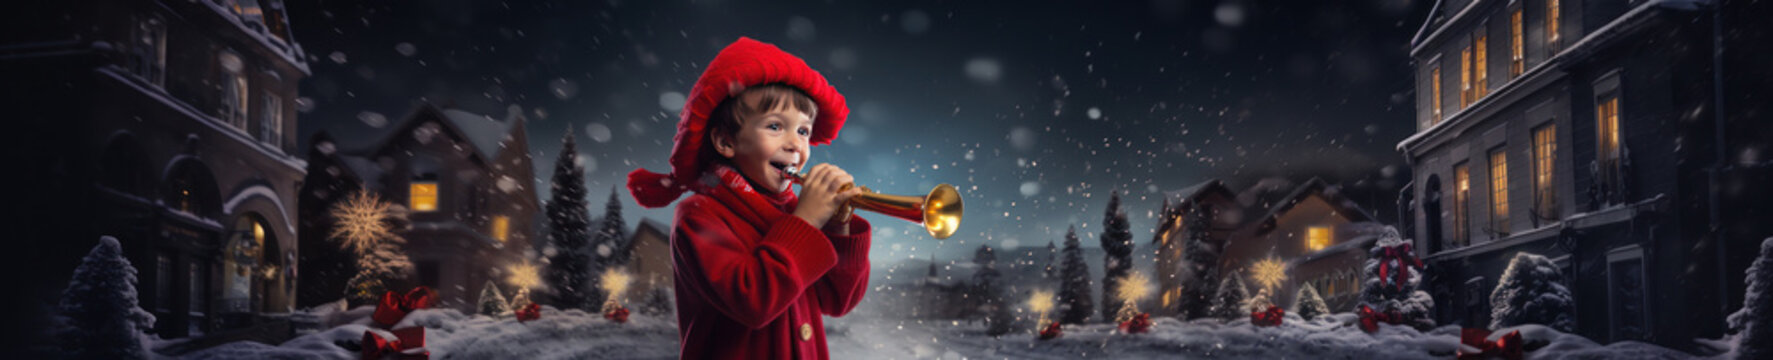 Long Christmas banner of young boy angel playing a trumpet in snowy festive scene